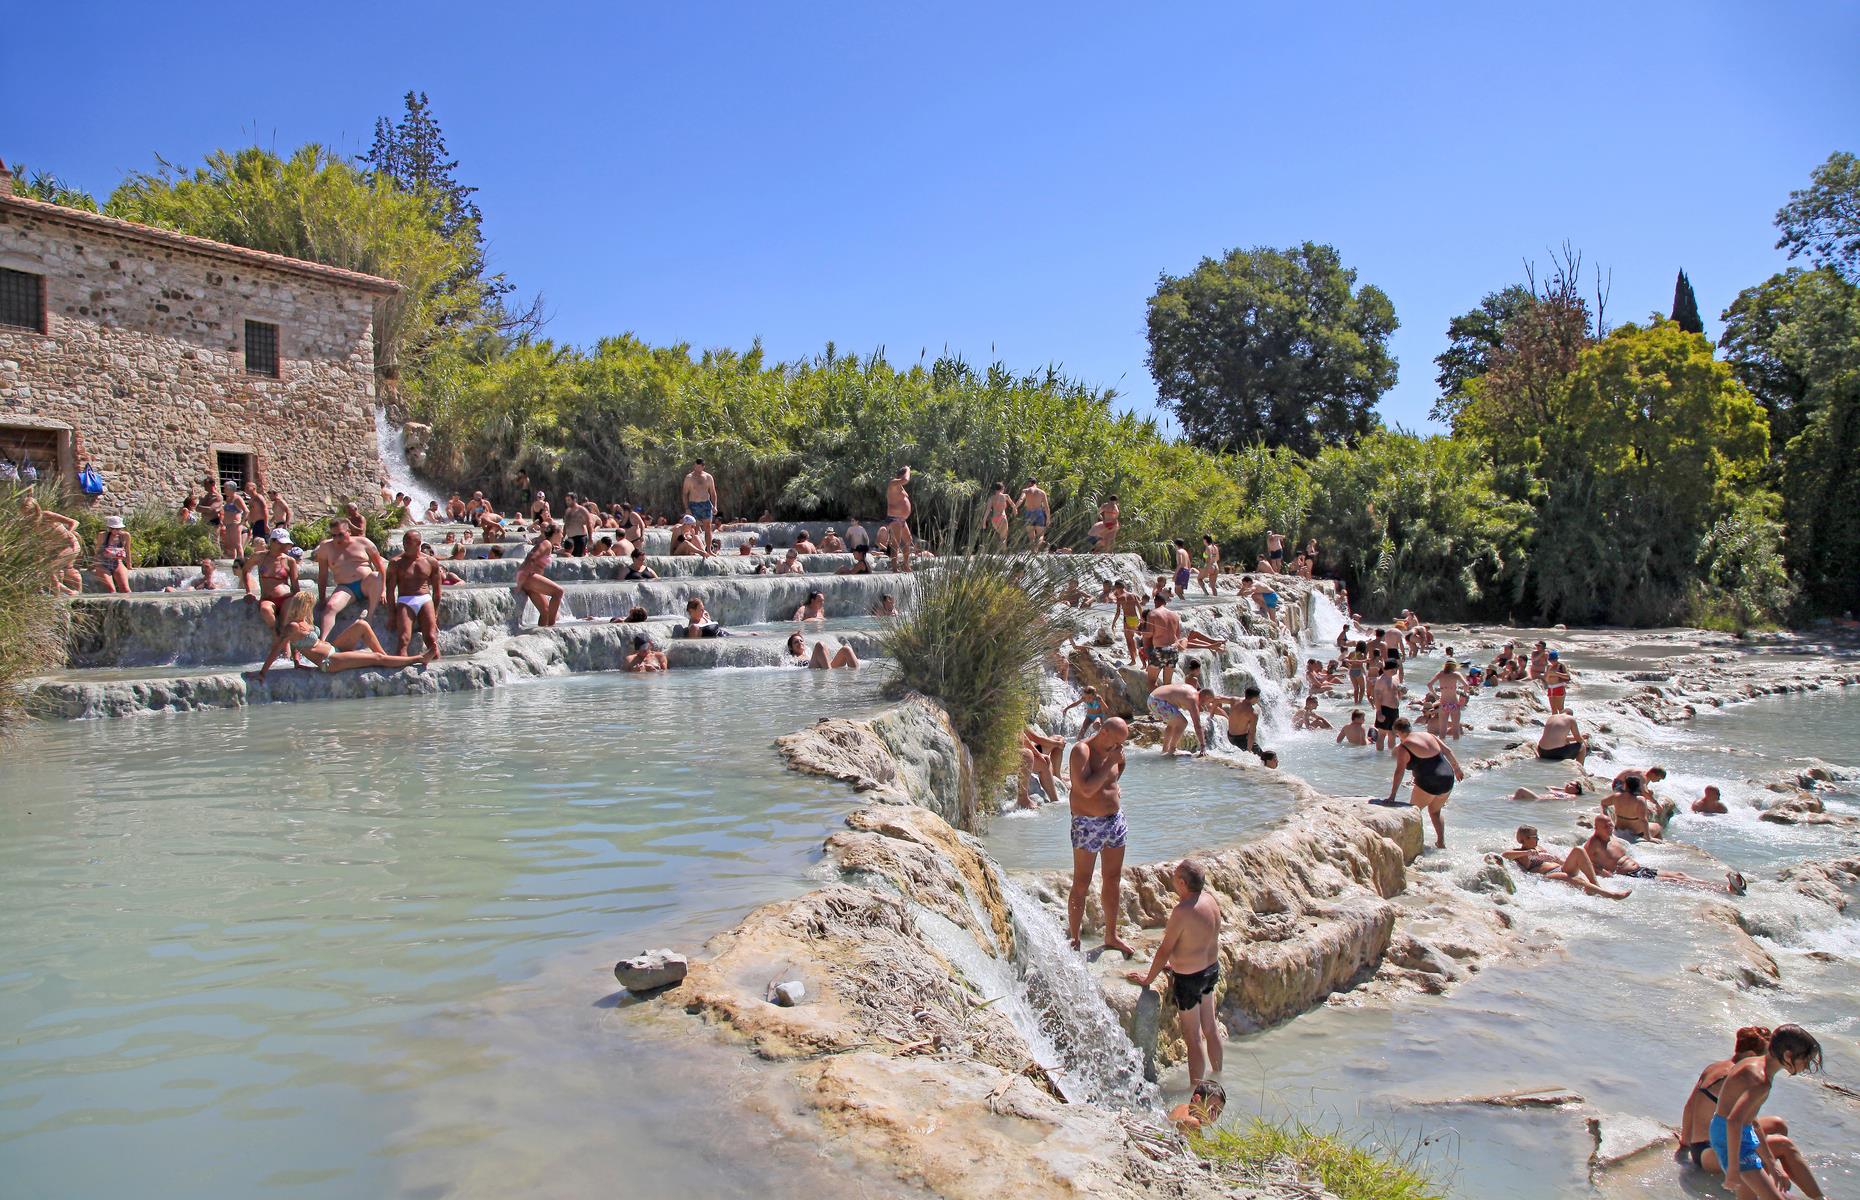 <p>Italians have floated in these naturally carved pools since Roman times in the firm belief that the thermal waters have healing properties. Wallow in the 37°C (99°F) waters as you gaze out over the Tuscan countryside. Best of all, entry is free. You’ll find Cascate Del Mulino just outside Saturnia. </p>